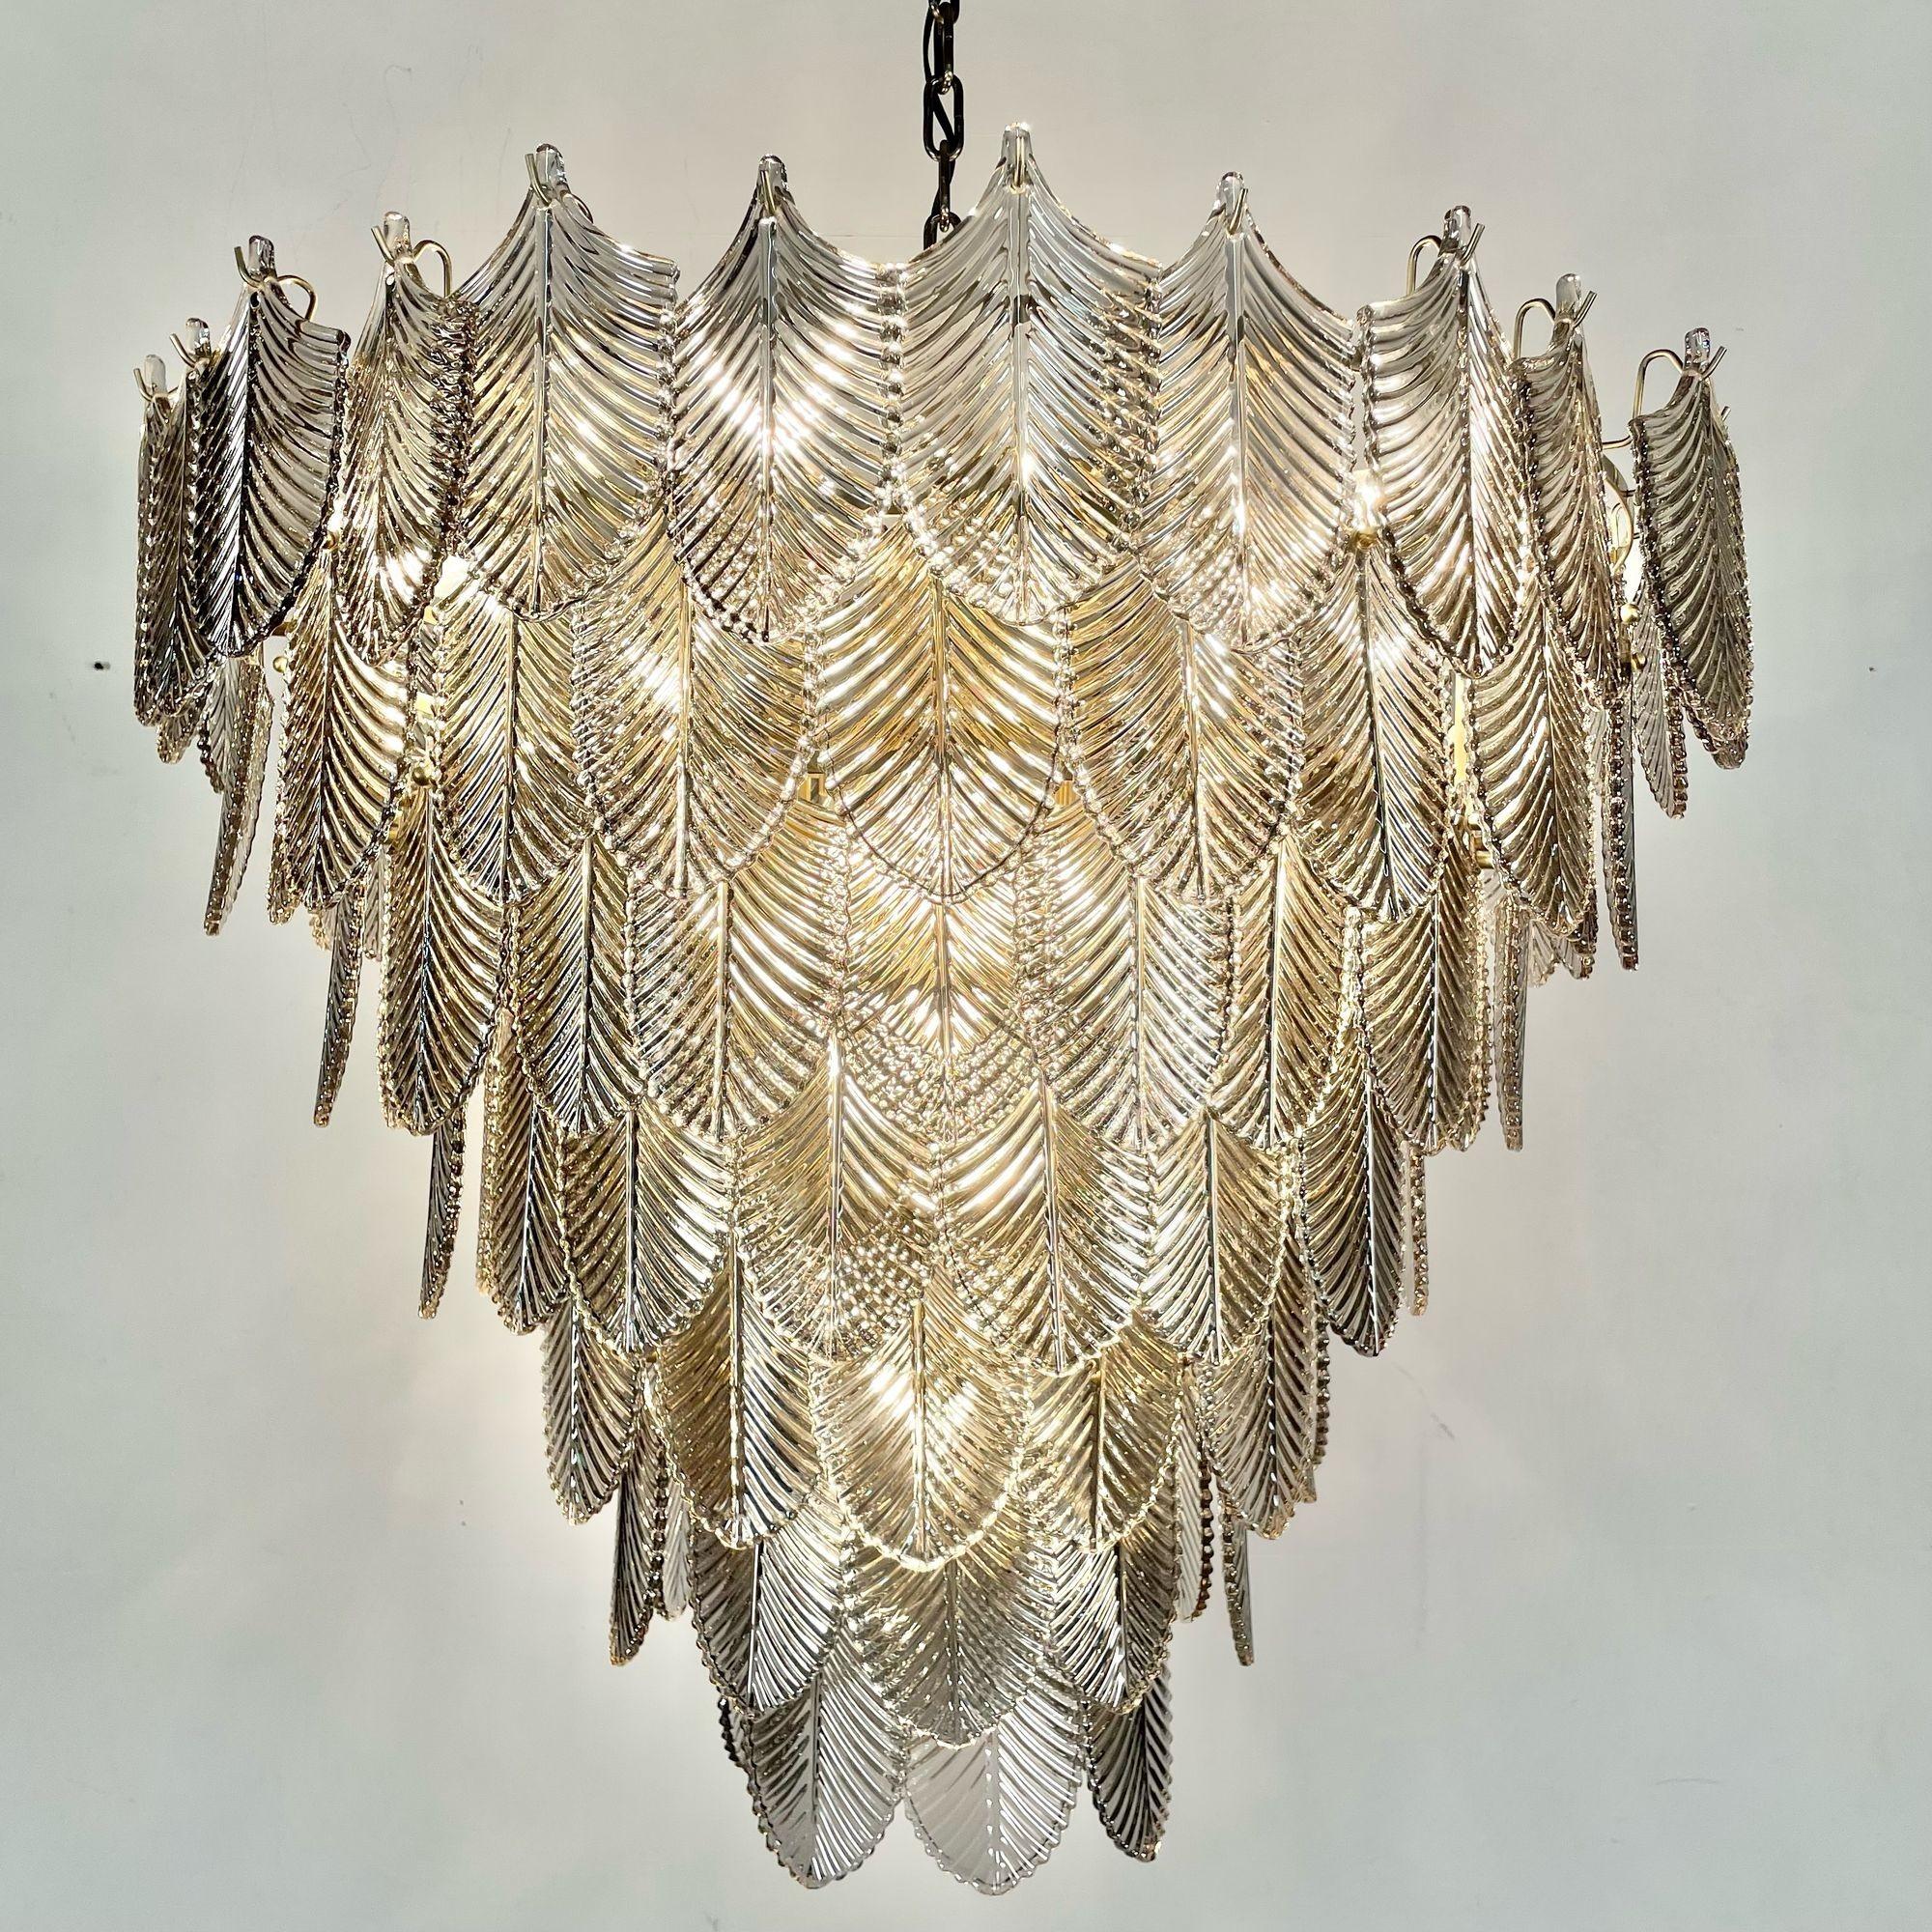 Modern Art Deco Style Chandelier / Pendant, Brass and Smoked Glass, Leaf Motif

Update your existing interiors with the Verbier L Chandelier, a real highlight that can be integrated into any modern or classic furnishing style. This tapered pendant